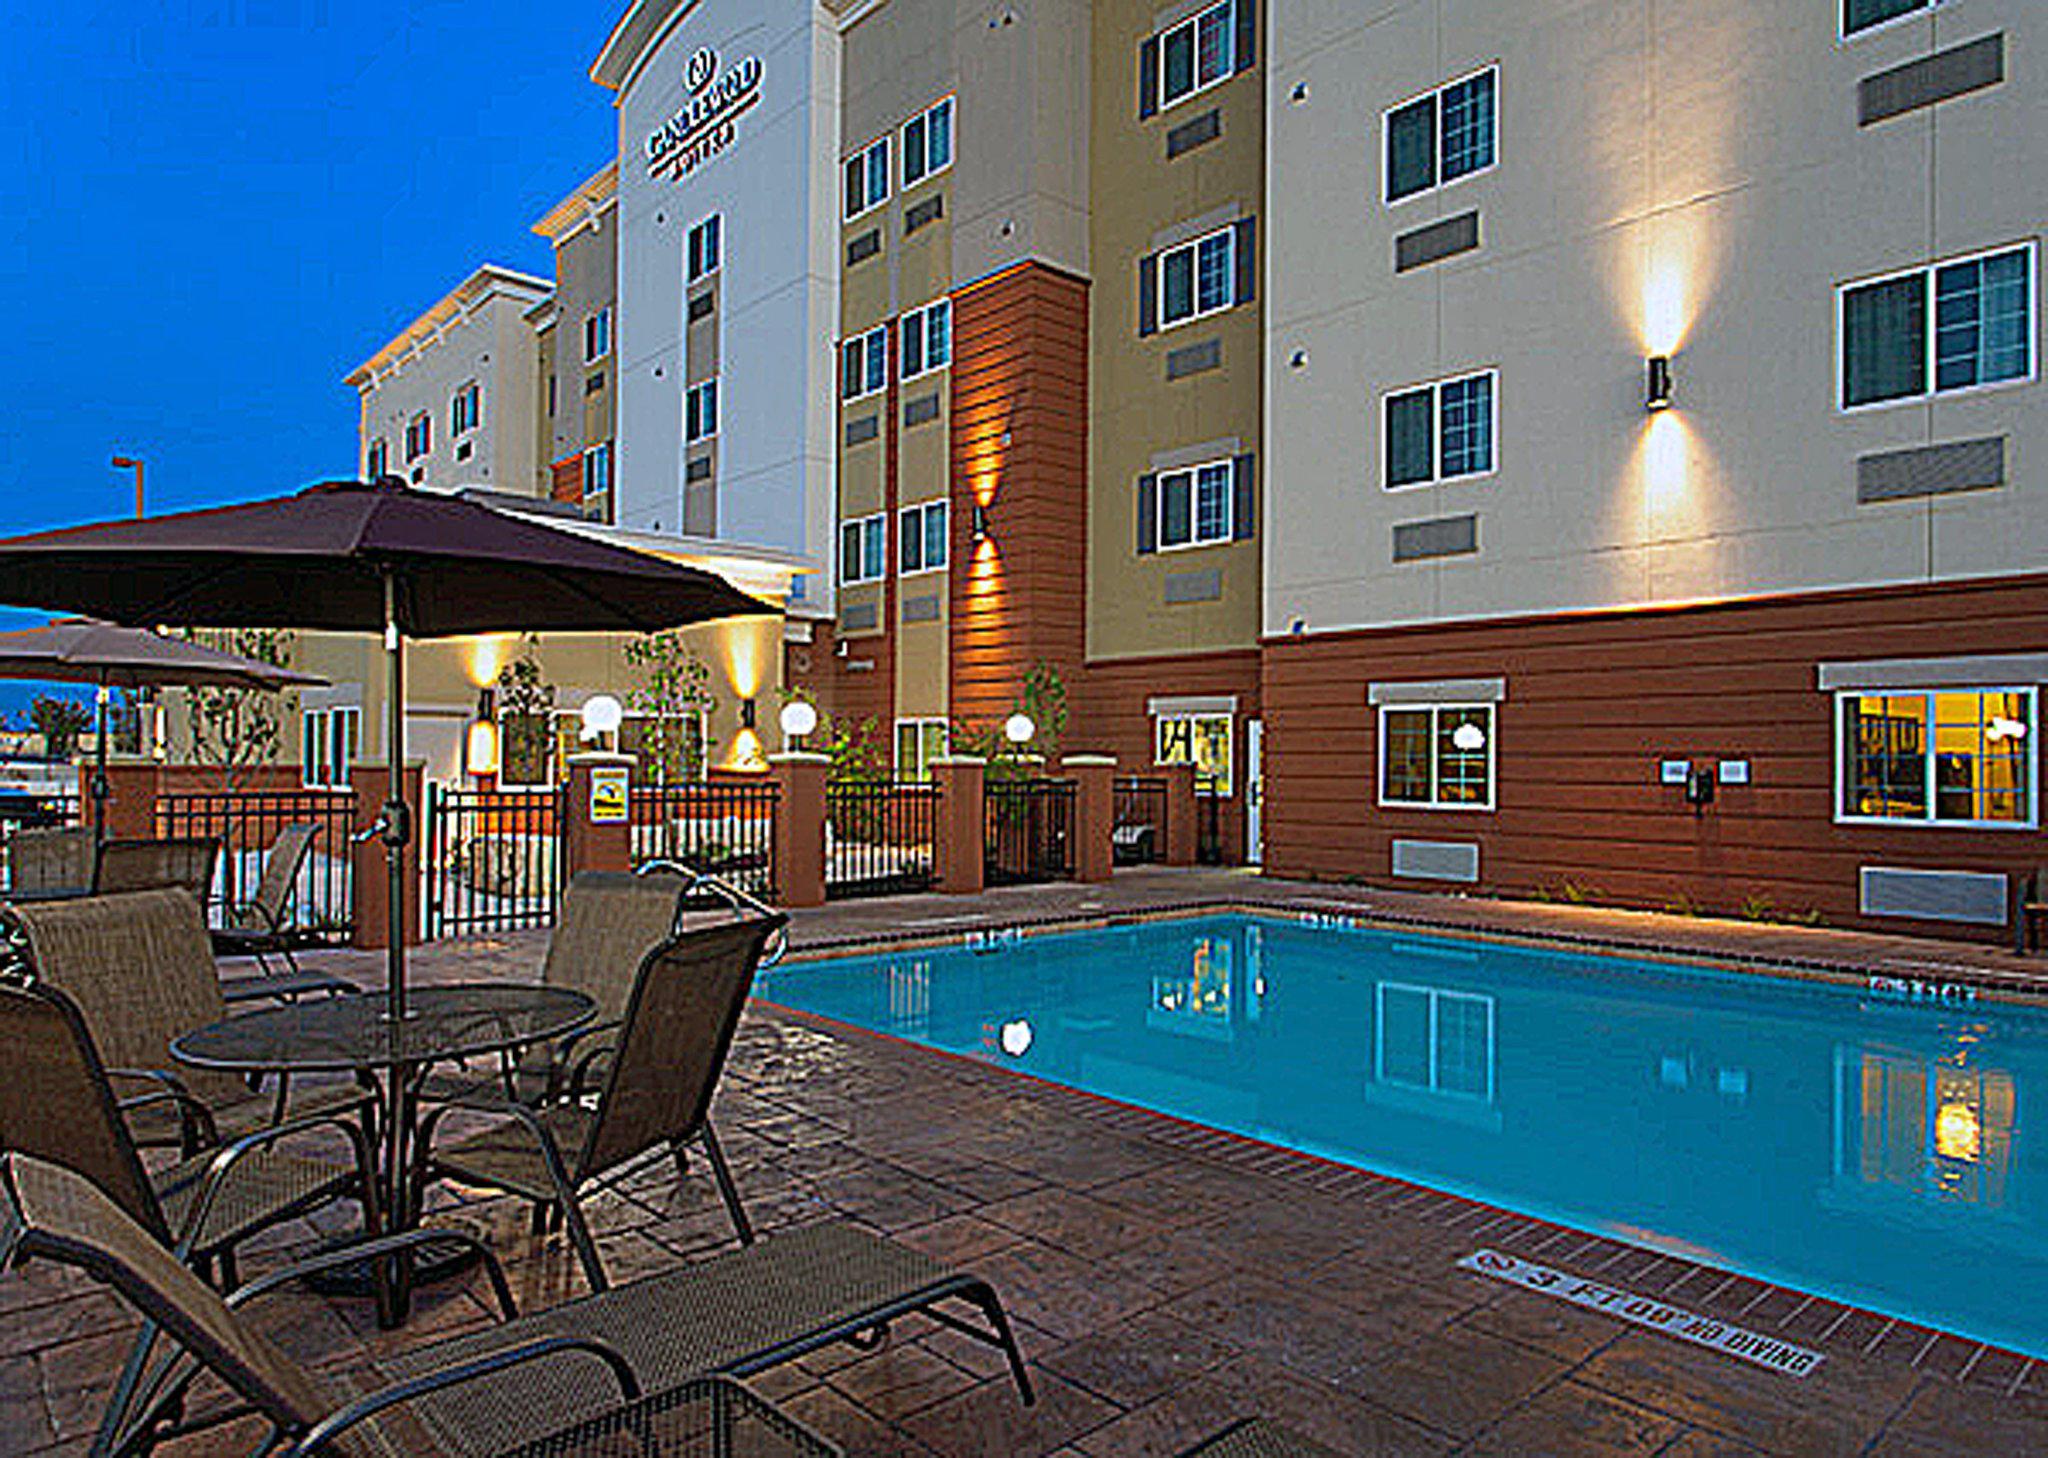 Candlewood Suites San Marcos Photo